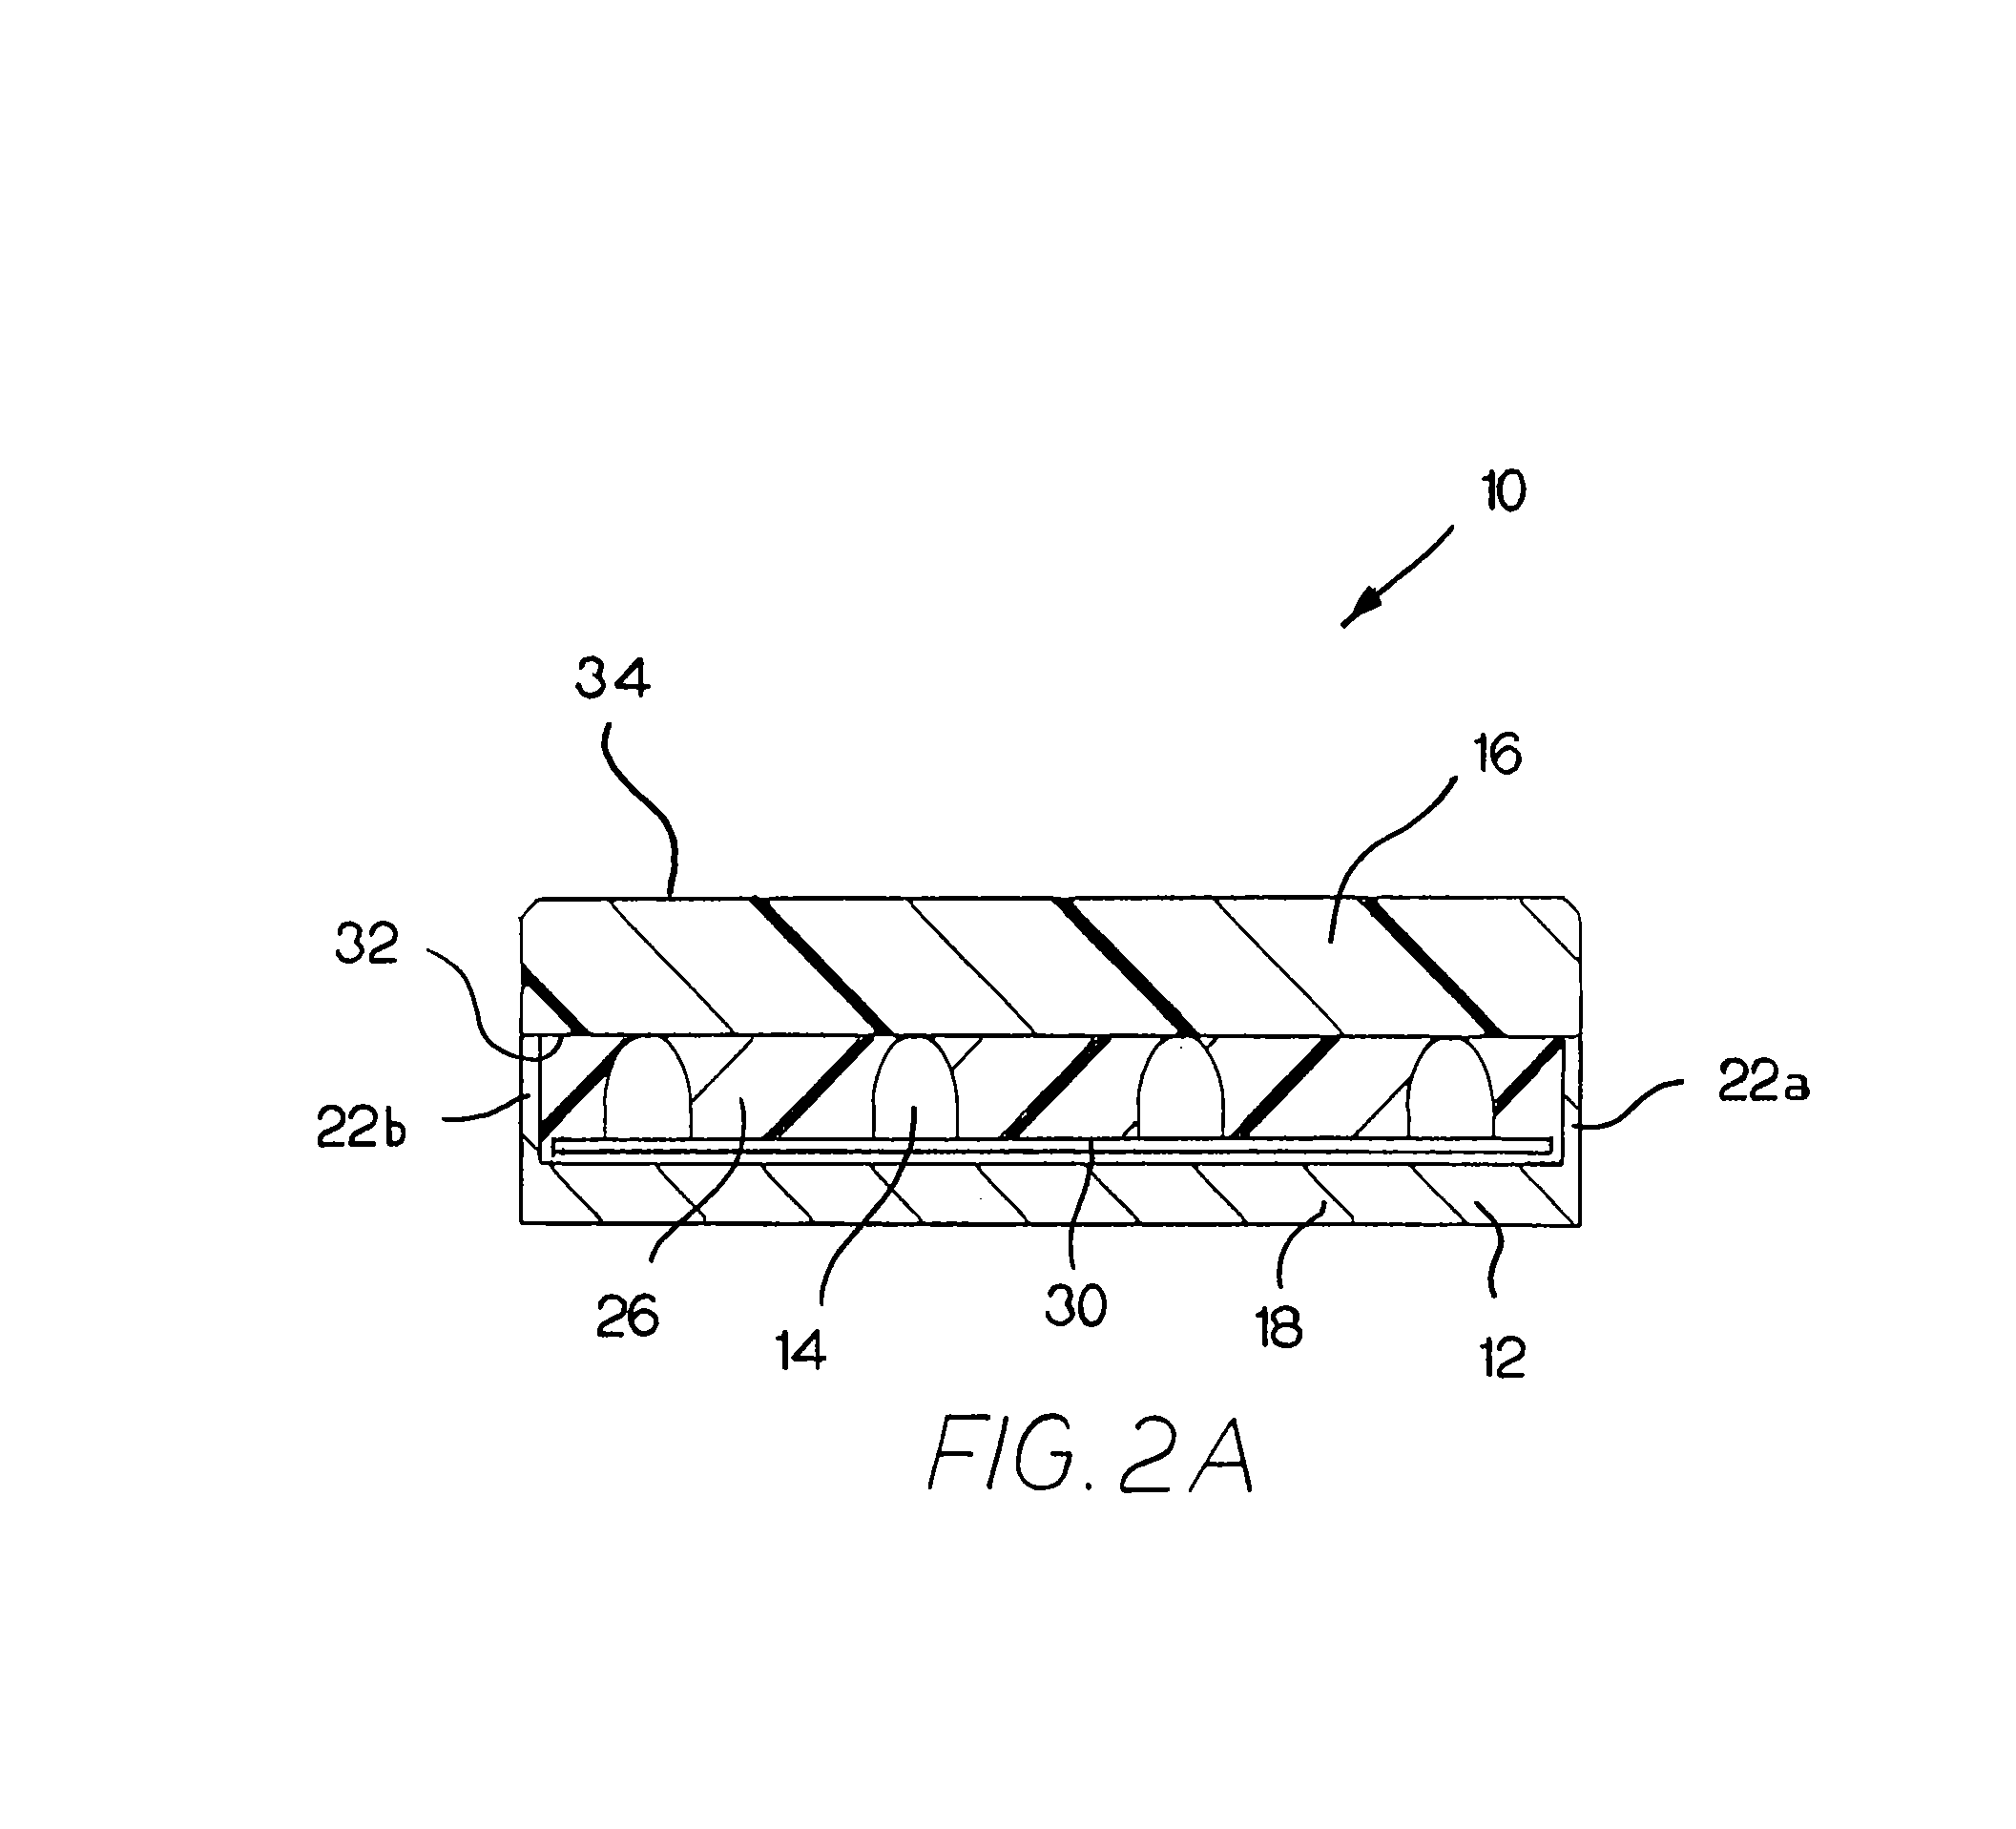 Illumination device for simulating channel letters